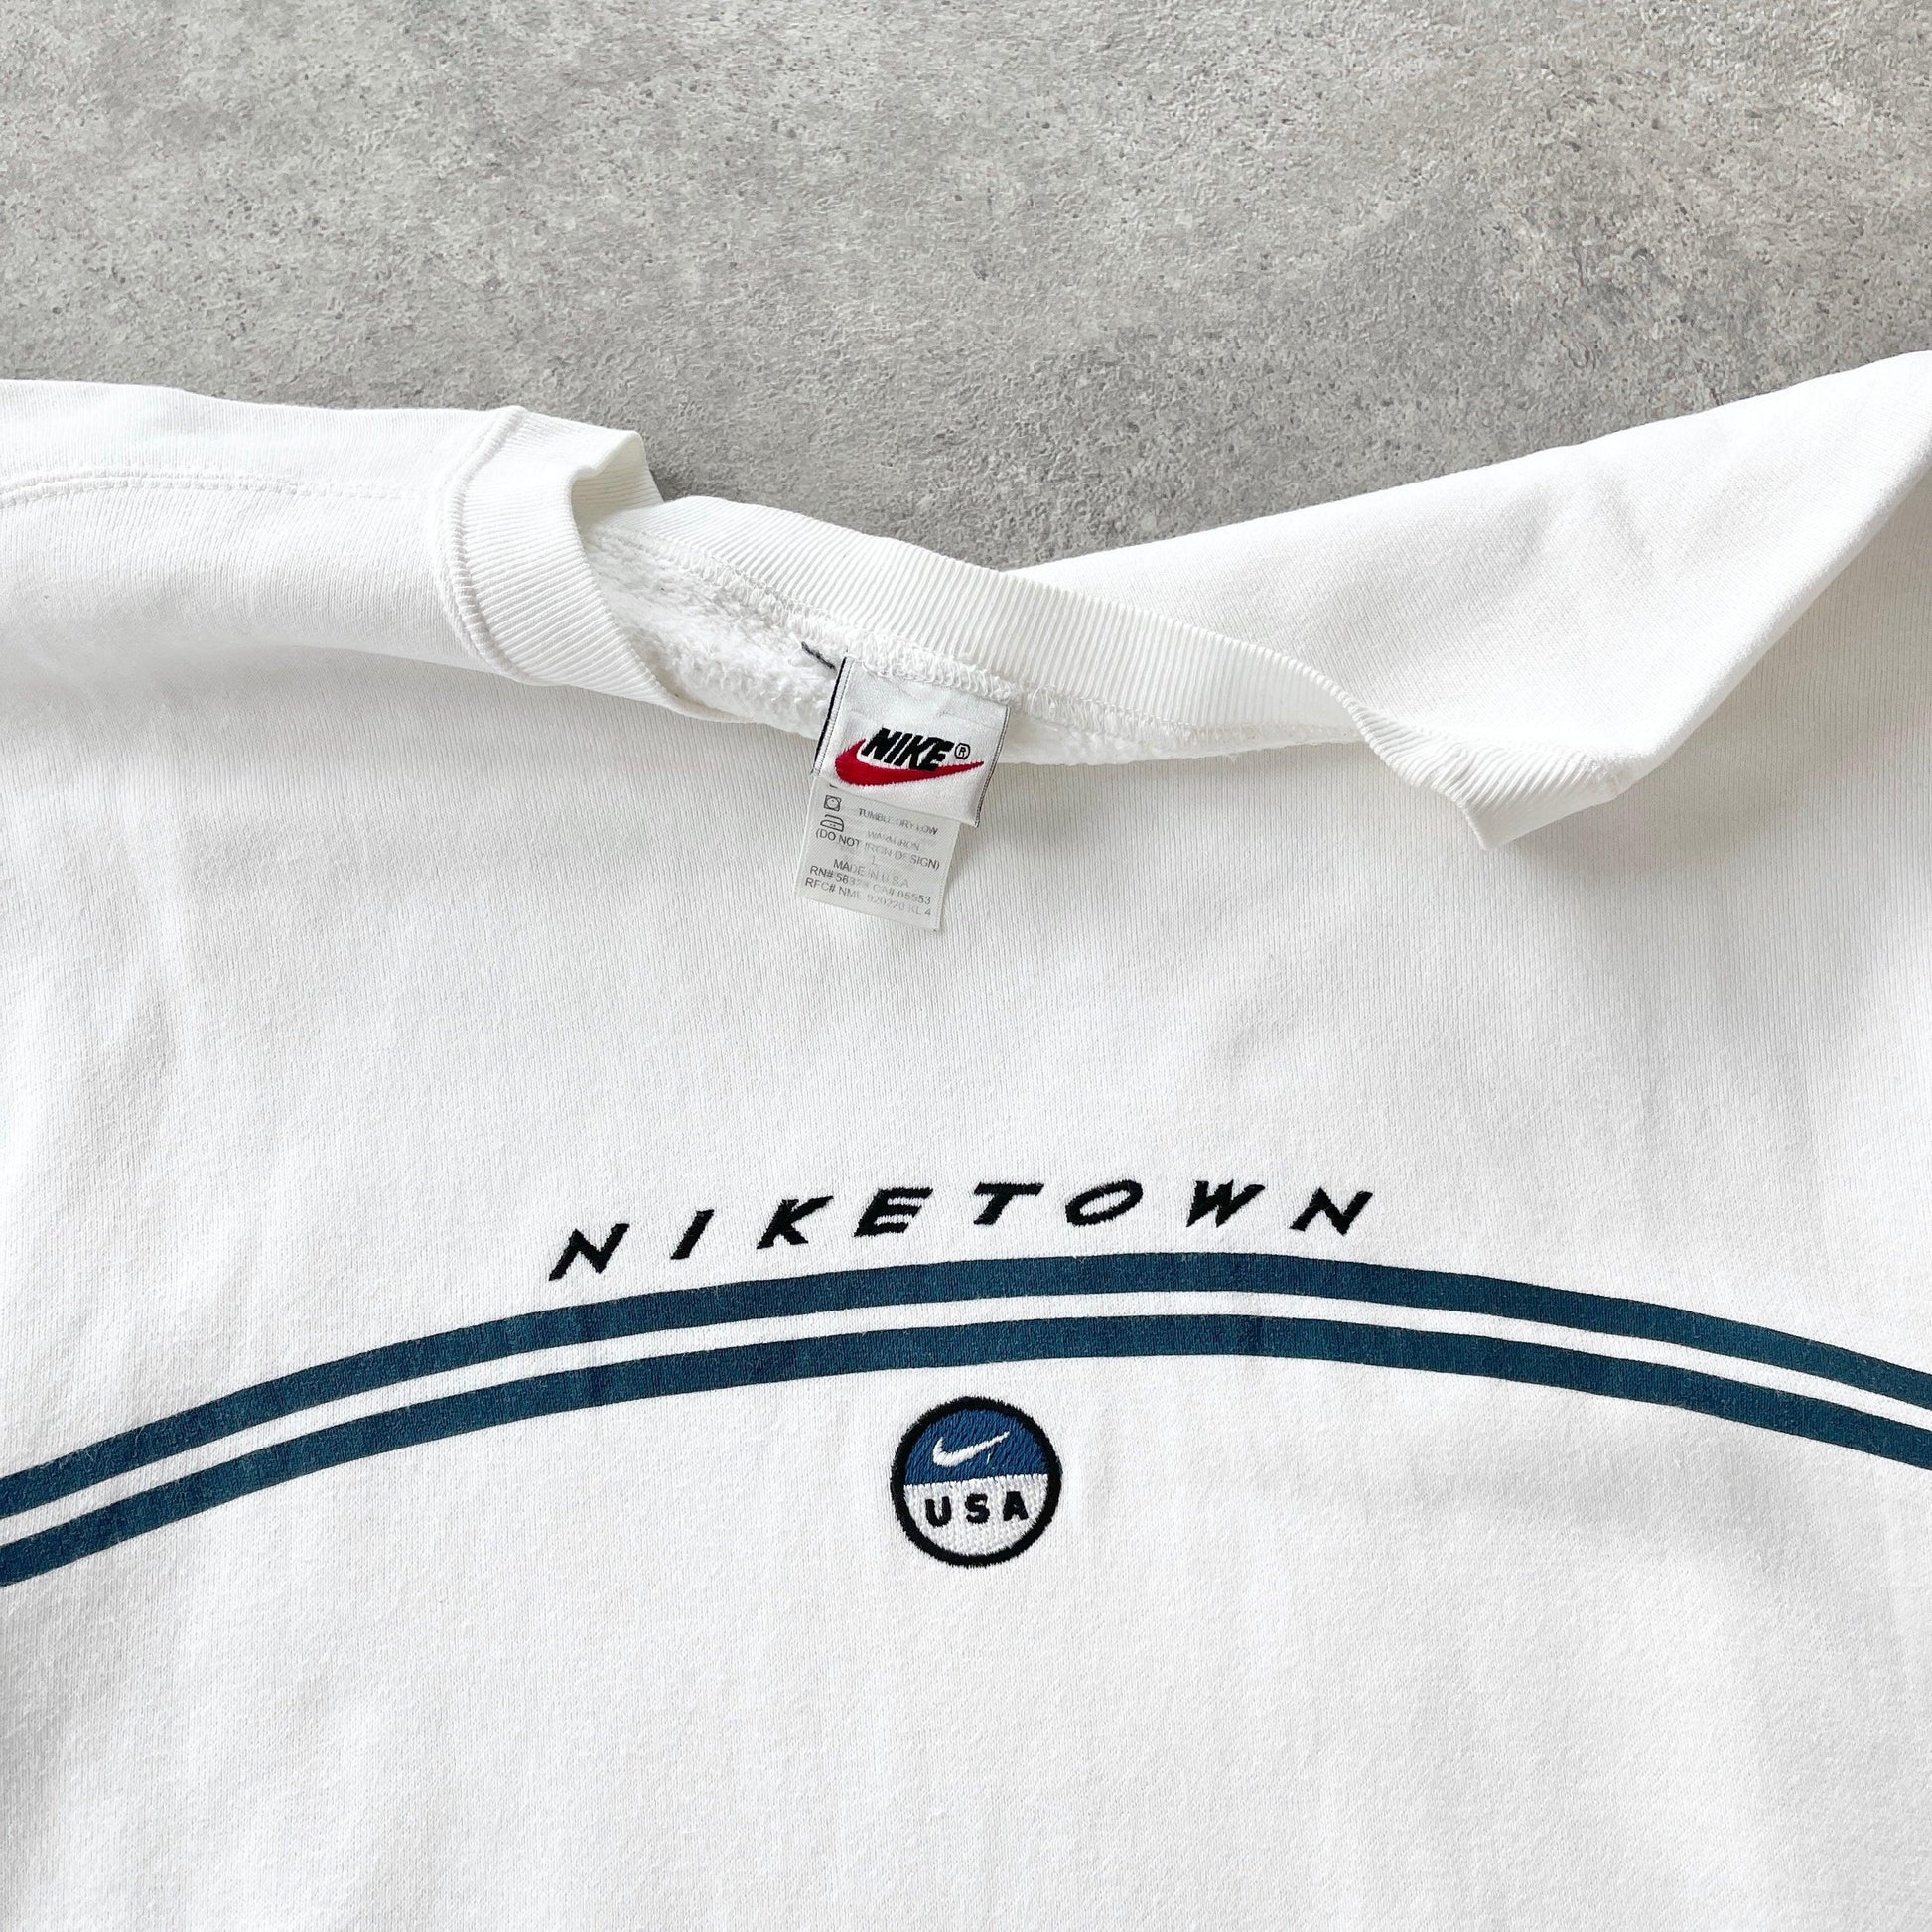 Nike Town USA RARE 1990s heavyweight embroidered sweatshirt (L) - Known Source